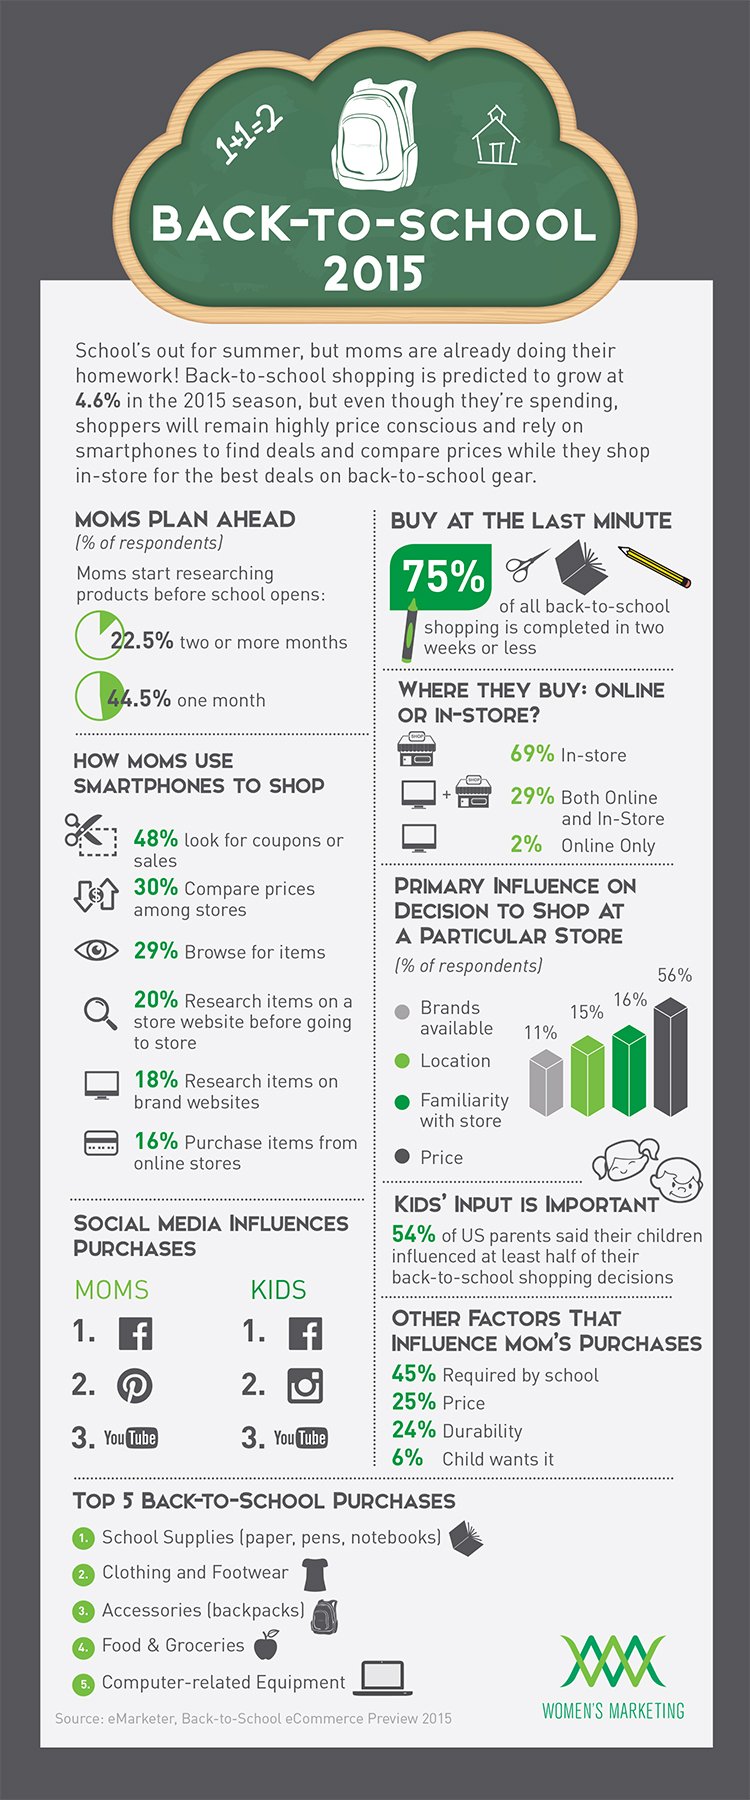 Back-to-school-items-and-shopping-trends-infographic